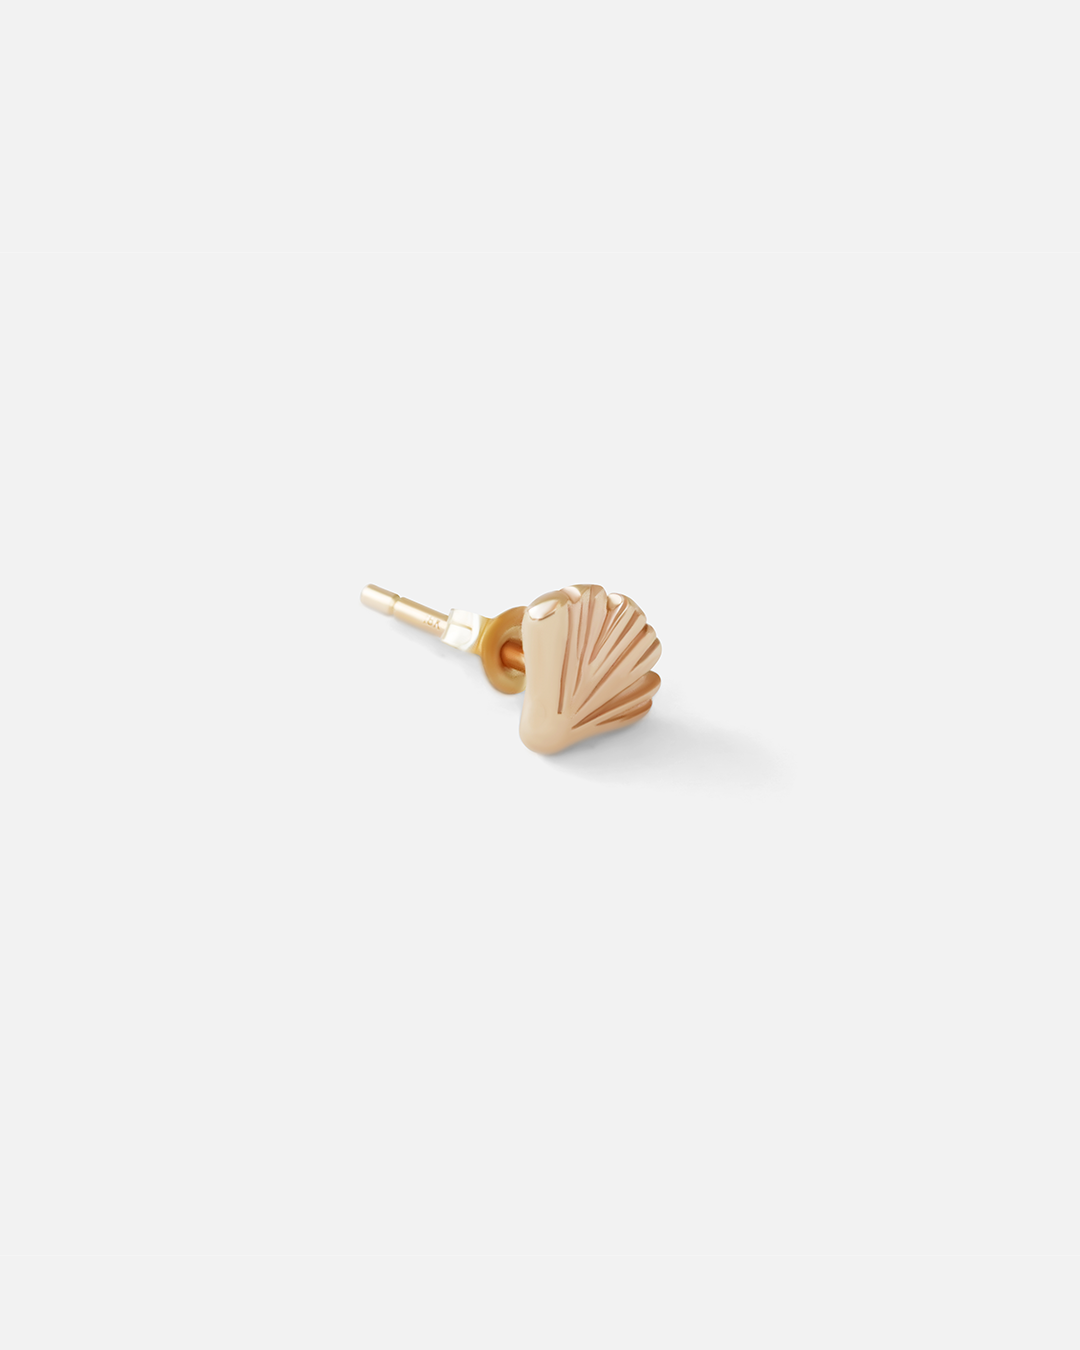 Gingko Stud By Young Sun Song in earrings Category